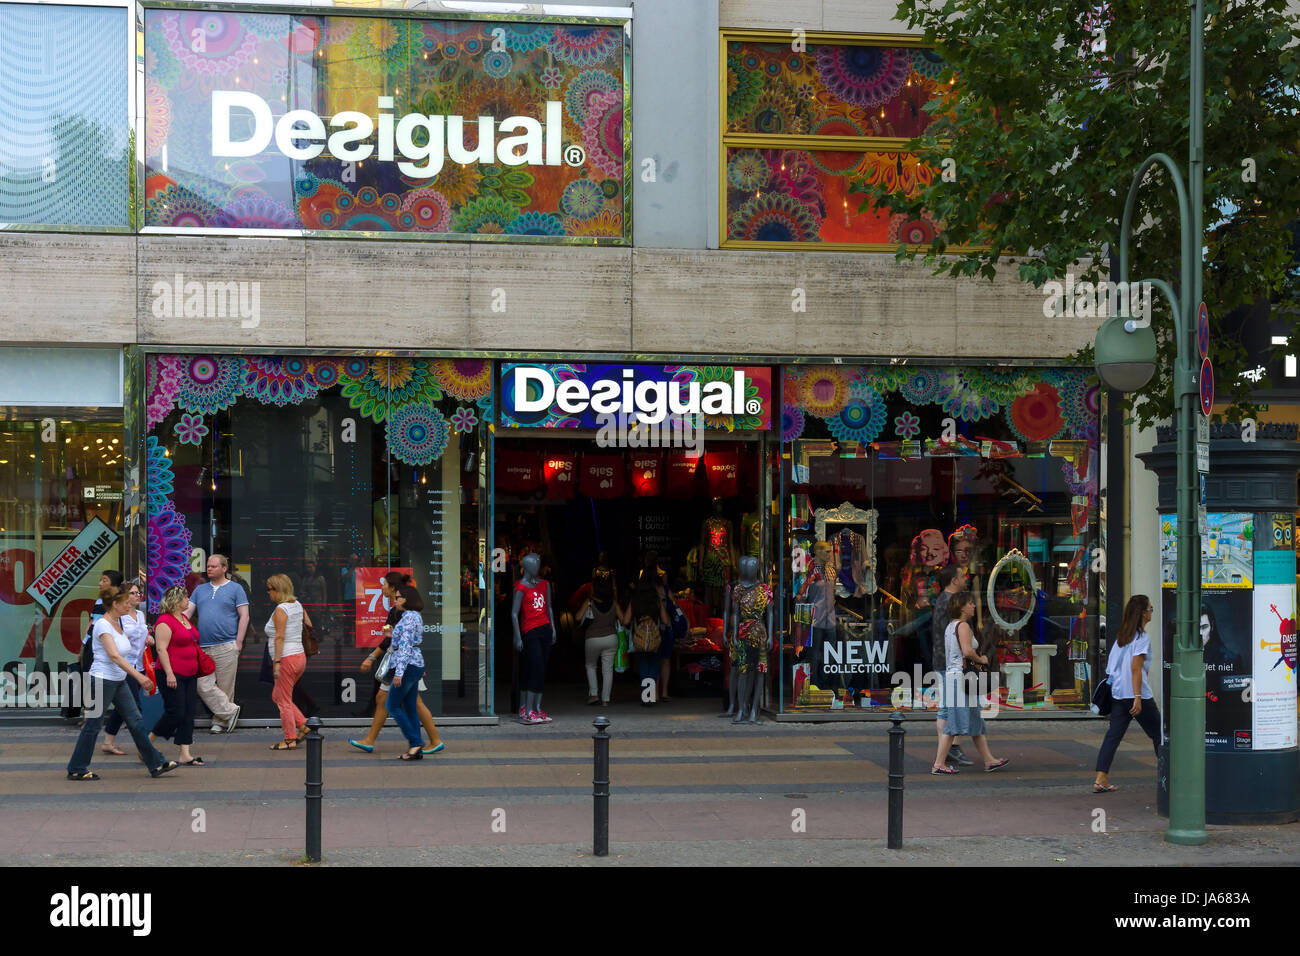 BERLIN - JULY 24: Desigual shop on Kurfuerstendamm. Desigual is a casual  clothing brand, which is noted for its patchwork designs, intense prints,  innovative graffiti art and flamboyant splashes of colour, July